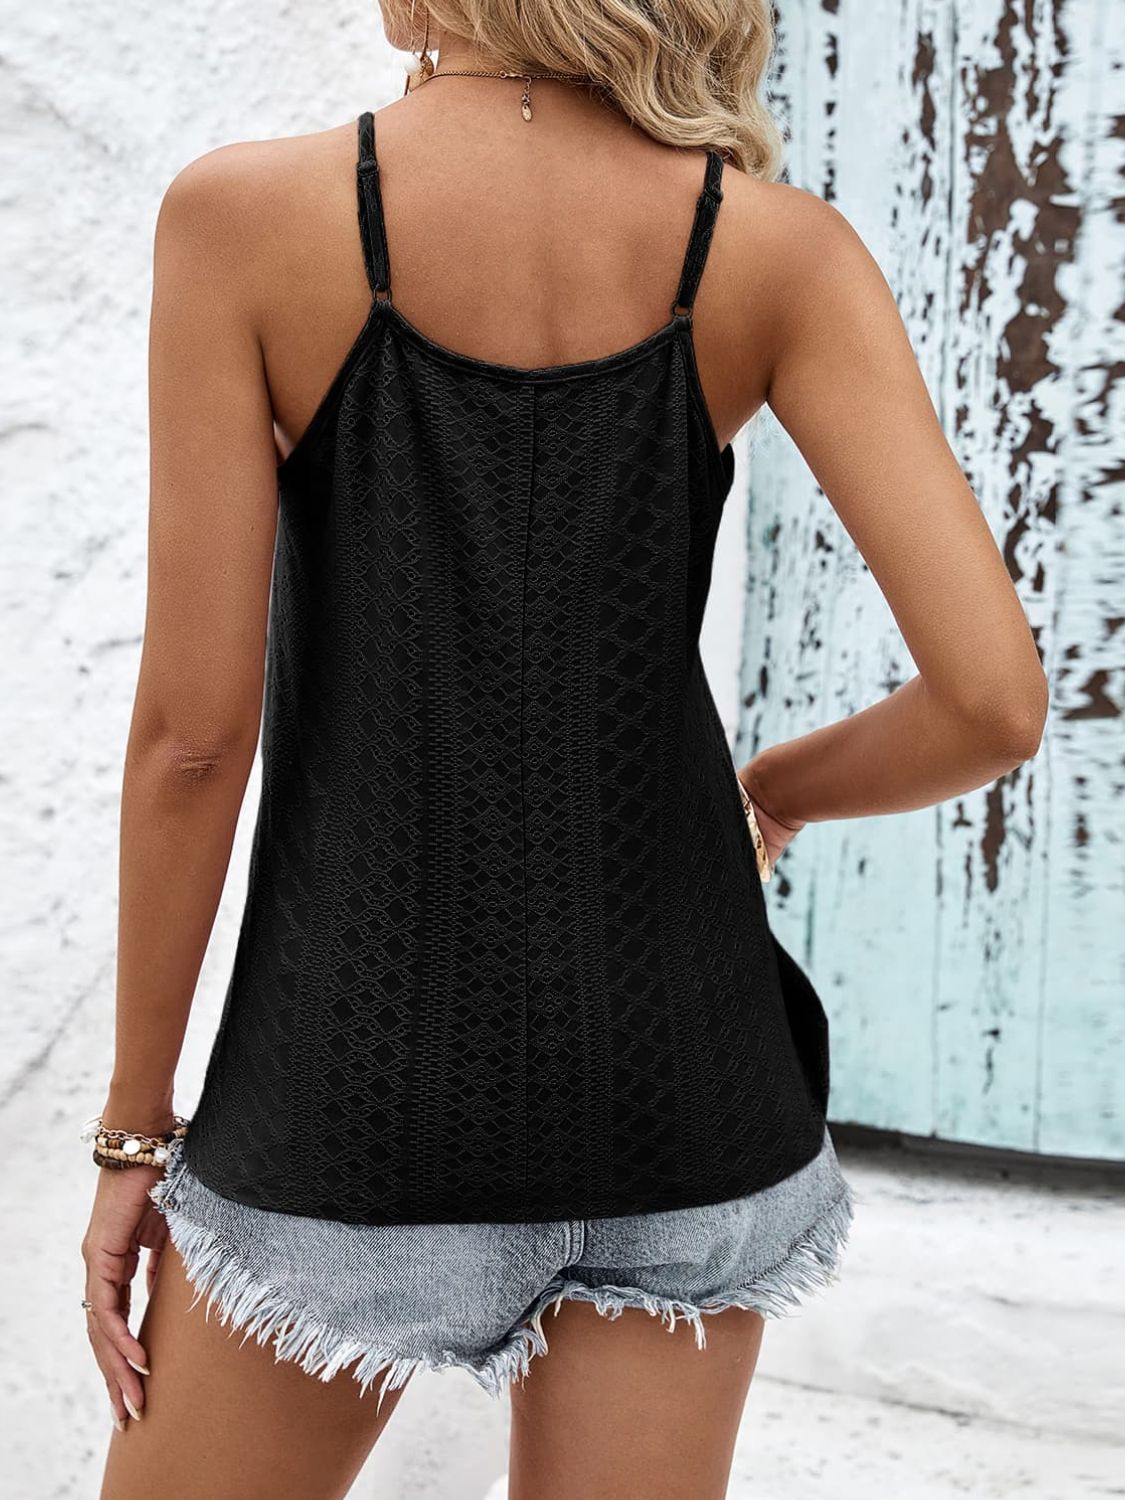 Eyelet Cami Top with Lace Detail - Global Village Kailua Boutique